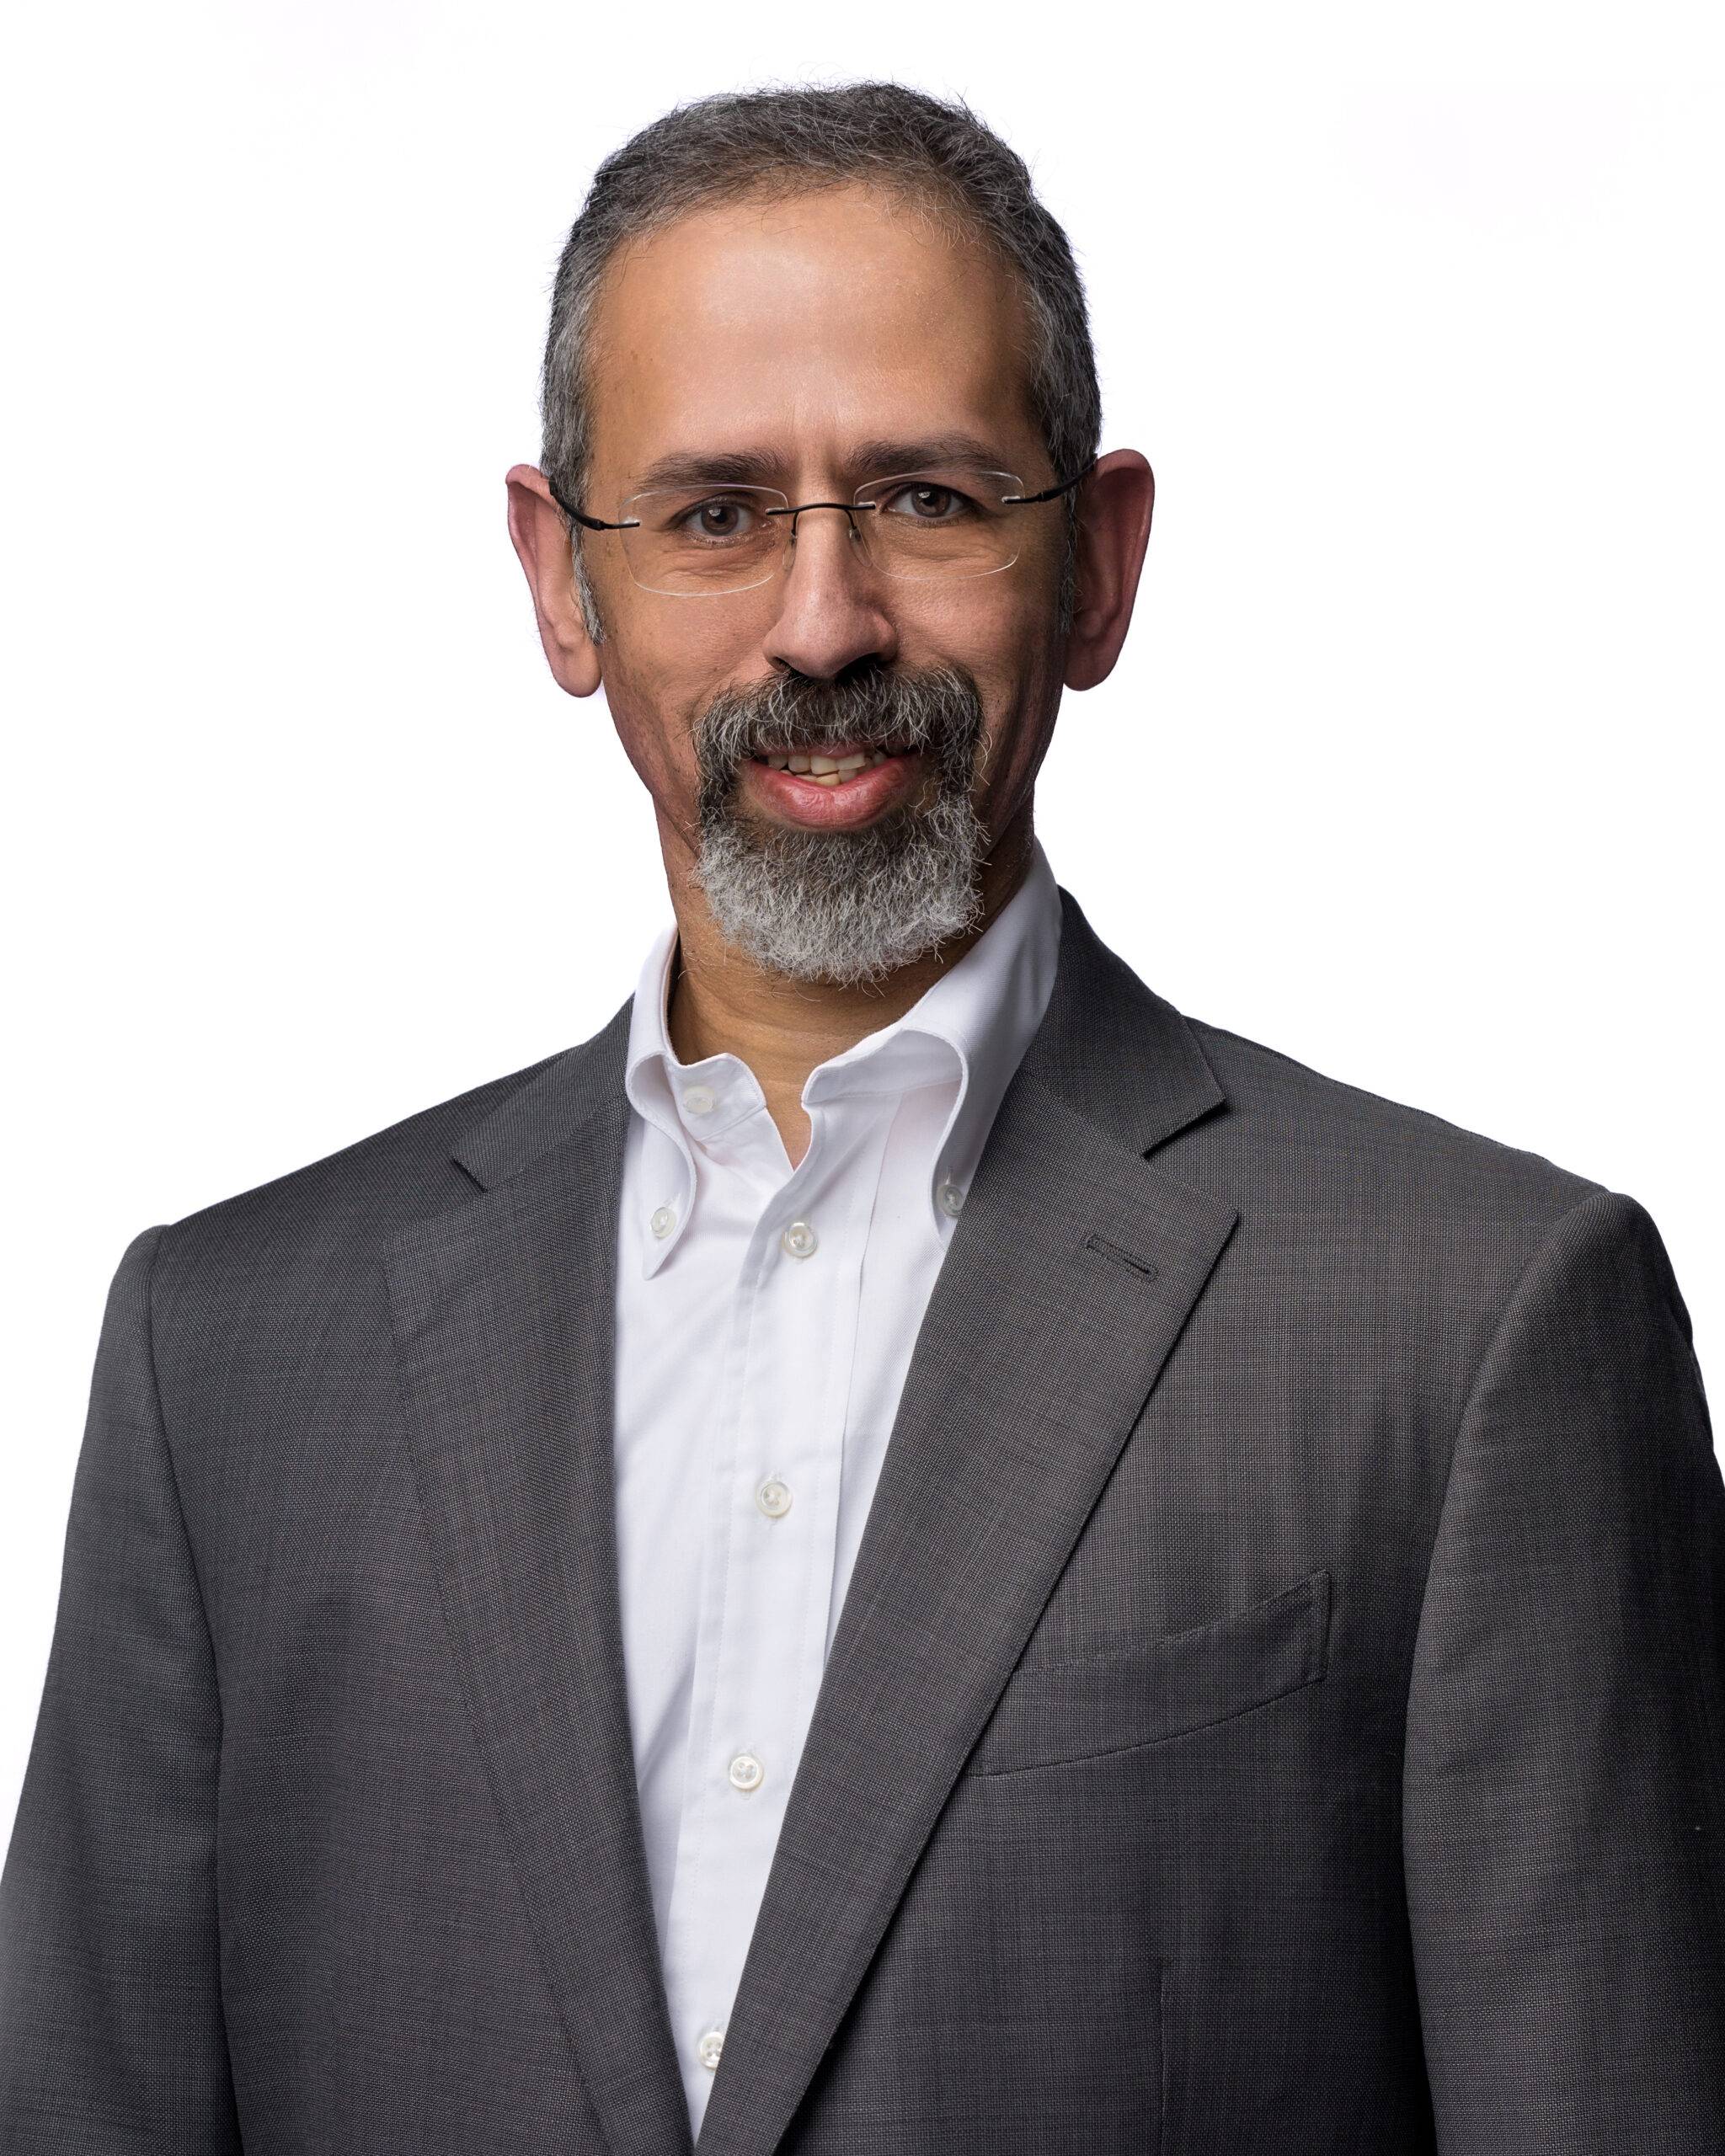 Headshot of Khaled Sedky, VP of Engineering at VMWare. Photographed by Ludeman Photographic (http://ludemanphotographic.com), Sammamish.